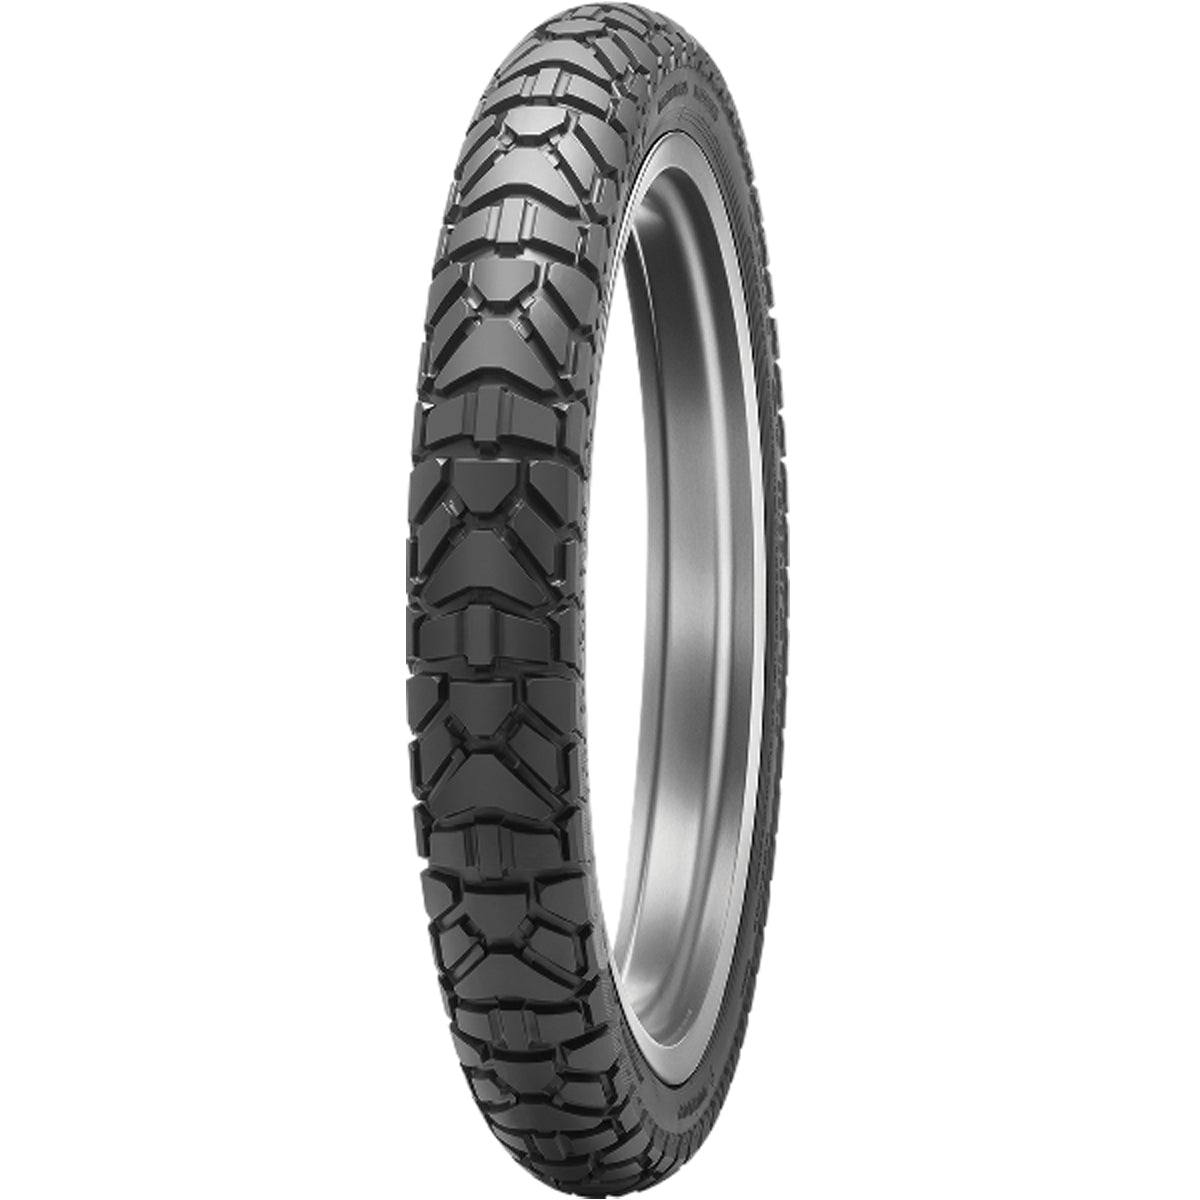 Dunlop Trailmax Mission 21" Front Off-Road Tires-0316